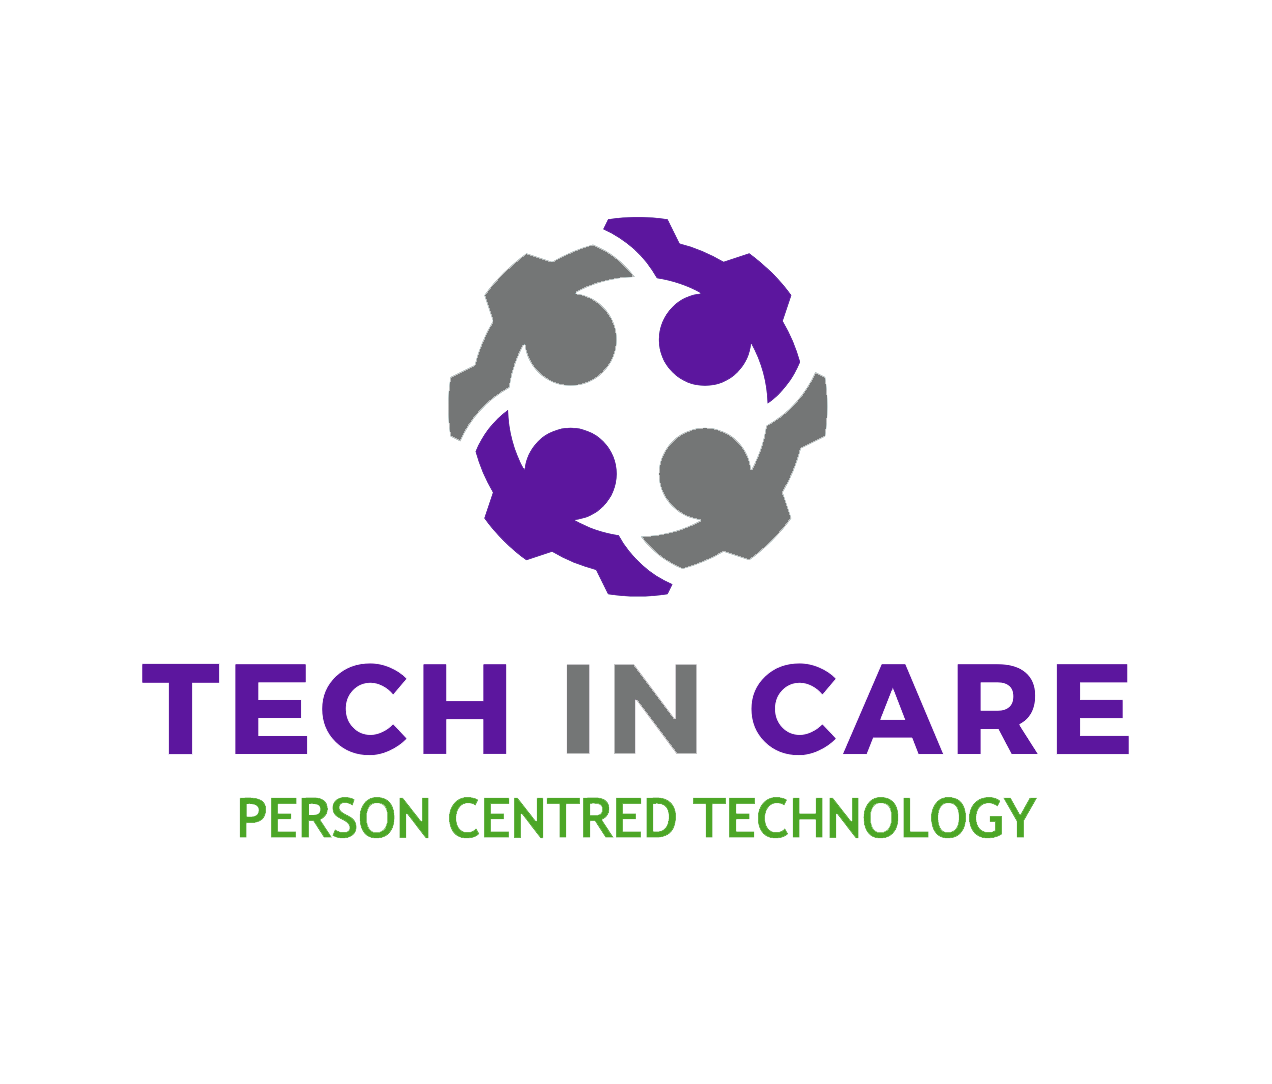 Tech in care - about